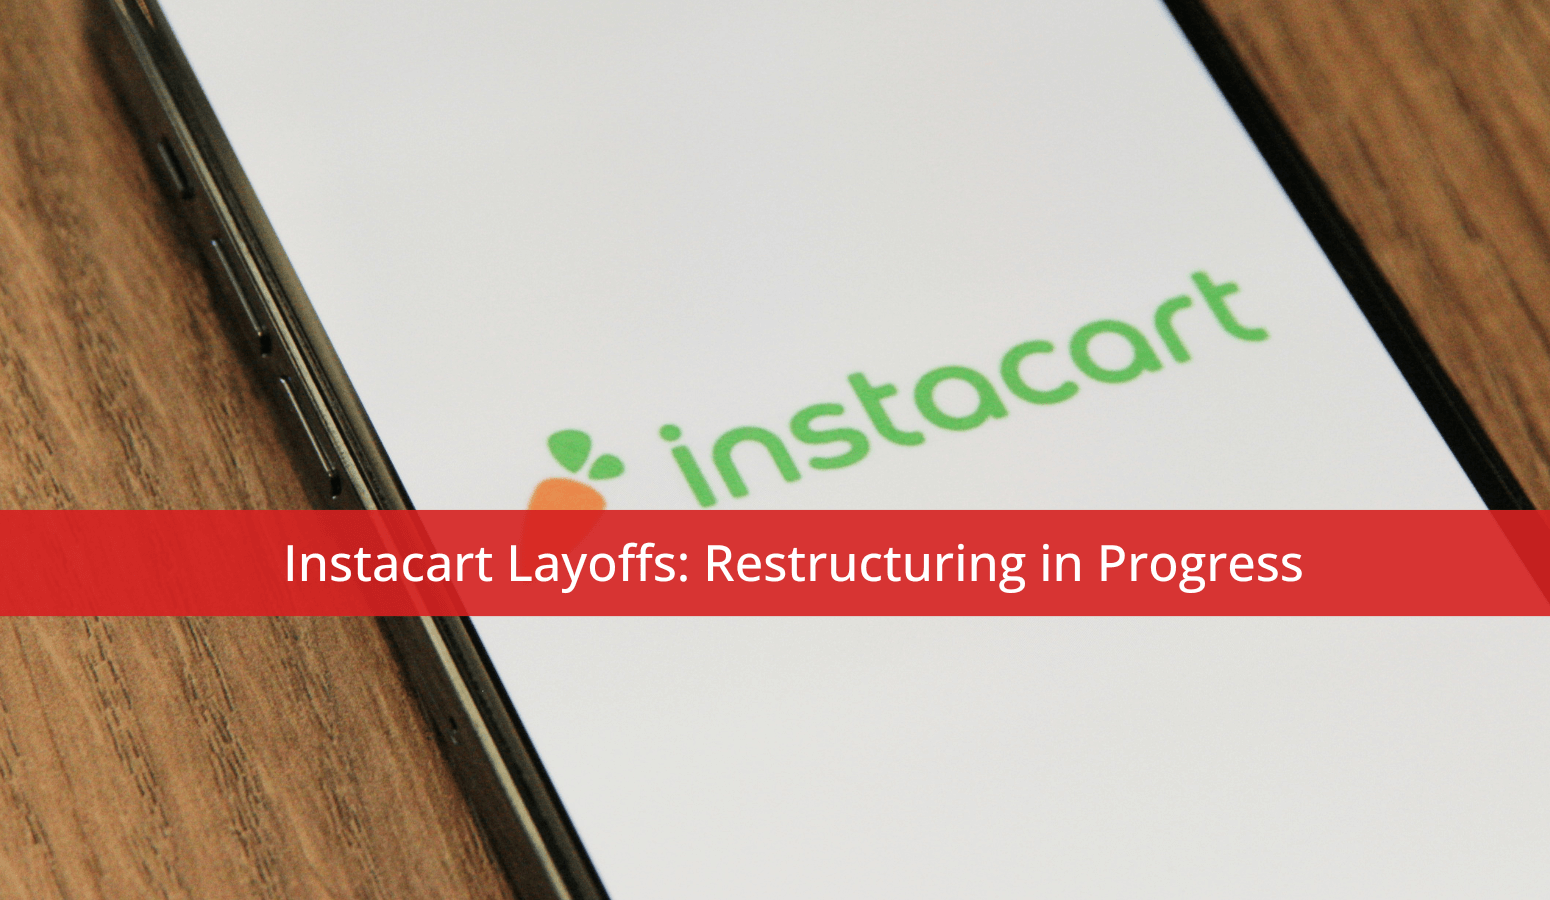 Featured image for “Instacart Layoffs: Restructuring in Progress”